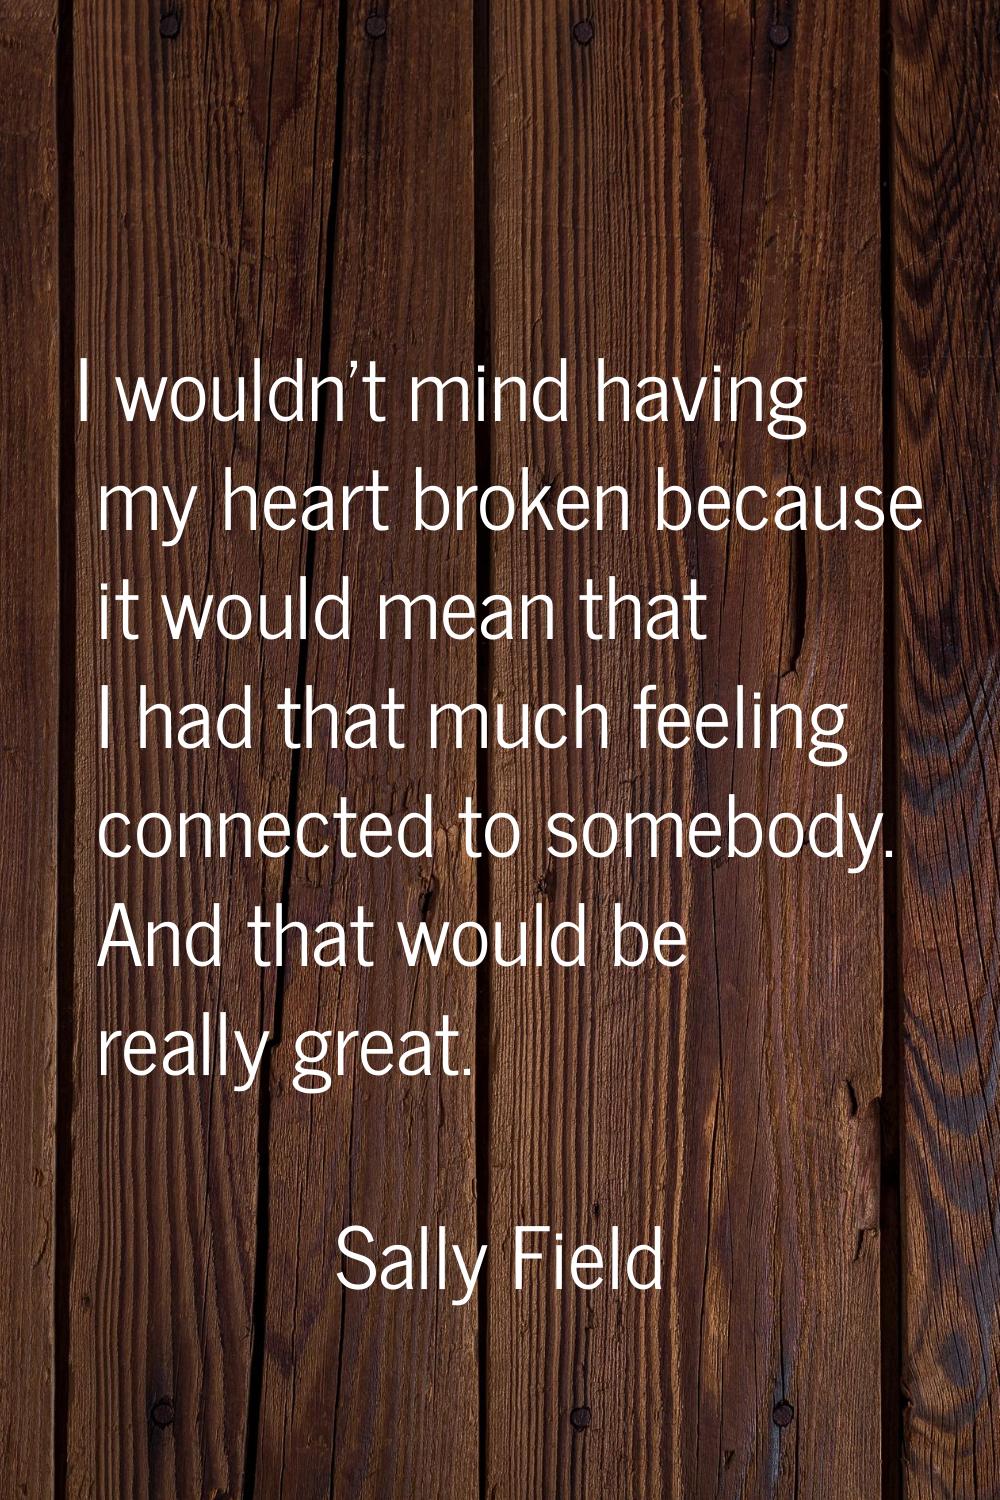 I wouldn't mind having my heart broken because it would mean that I had that much feeling connected